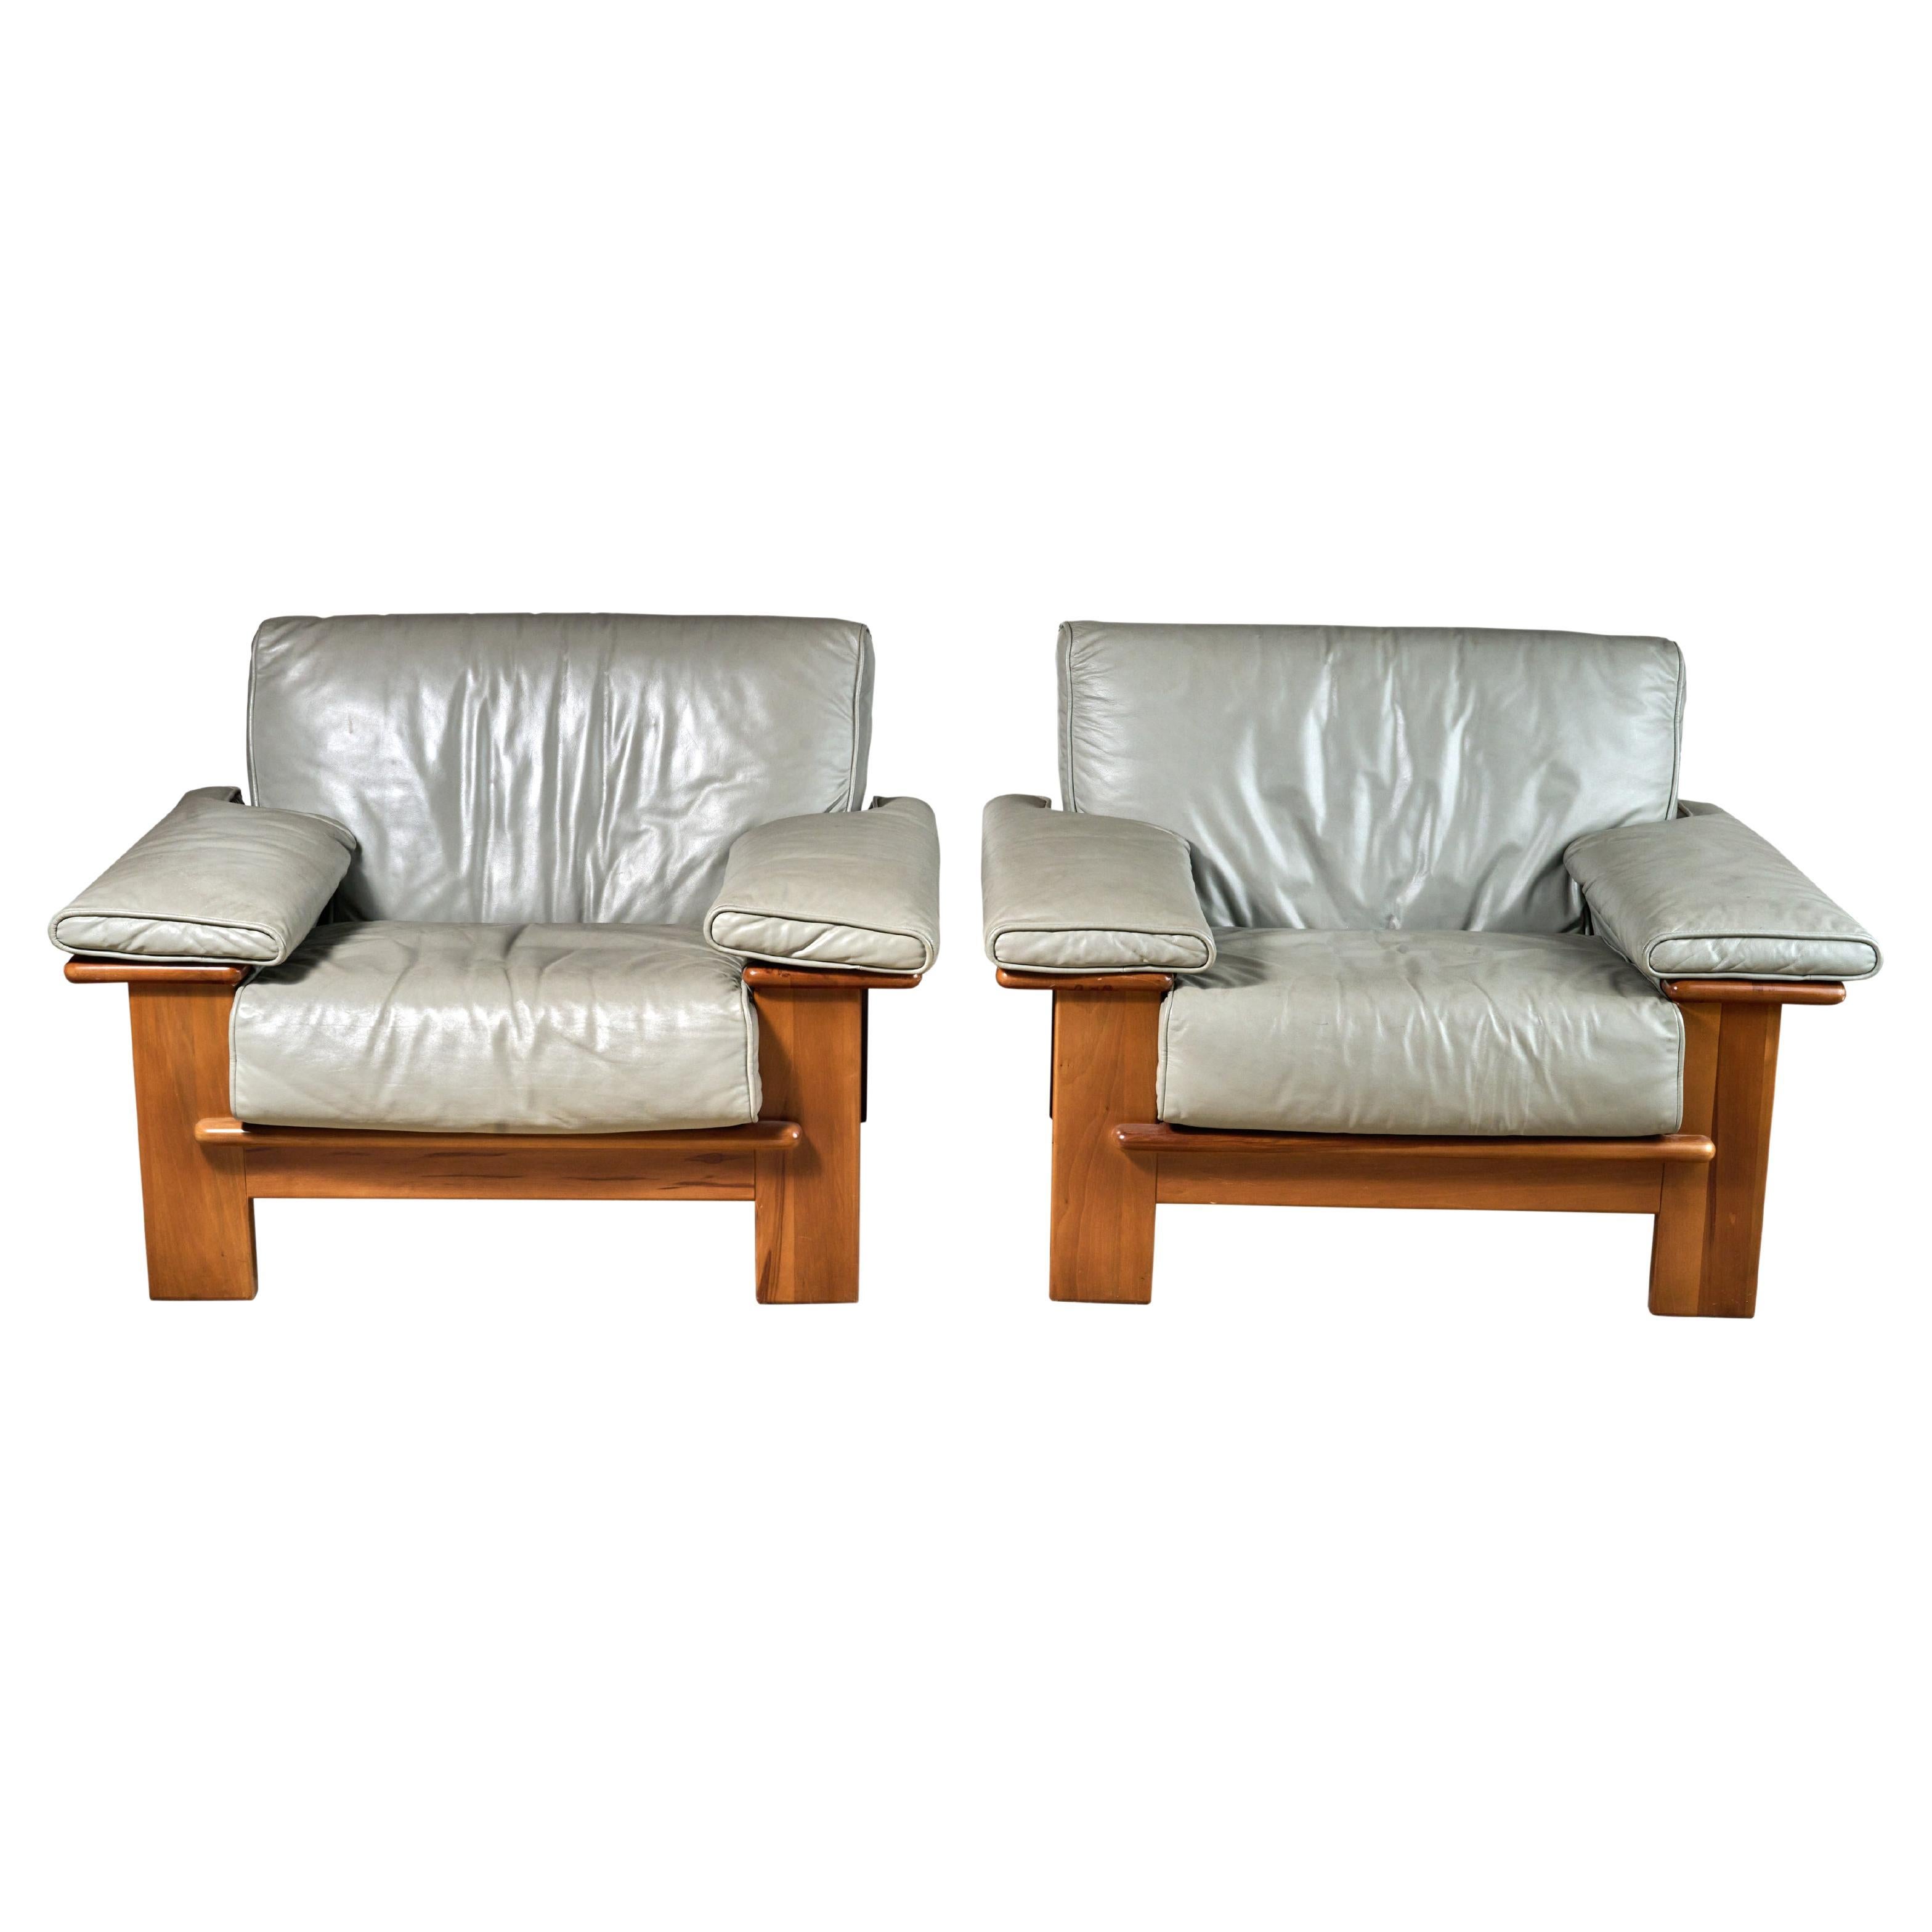 Pair of Swedish Leather and Wood Mid Century Chairs For Sale 1